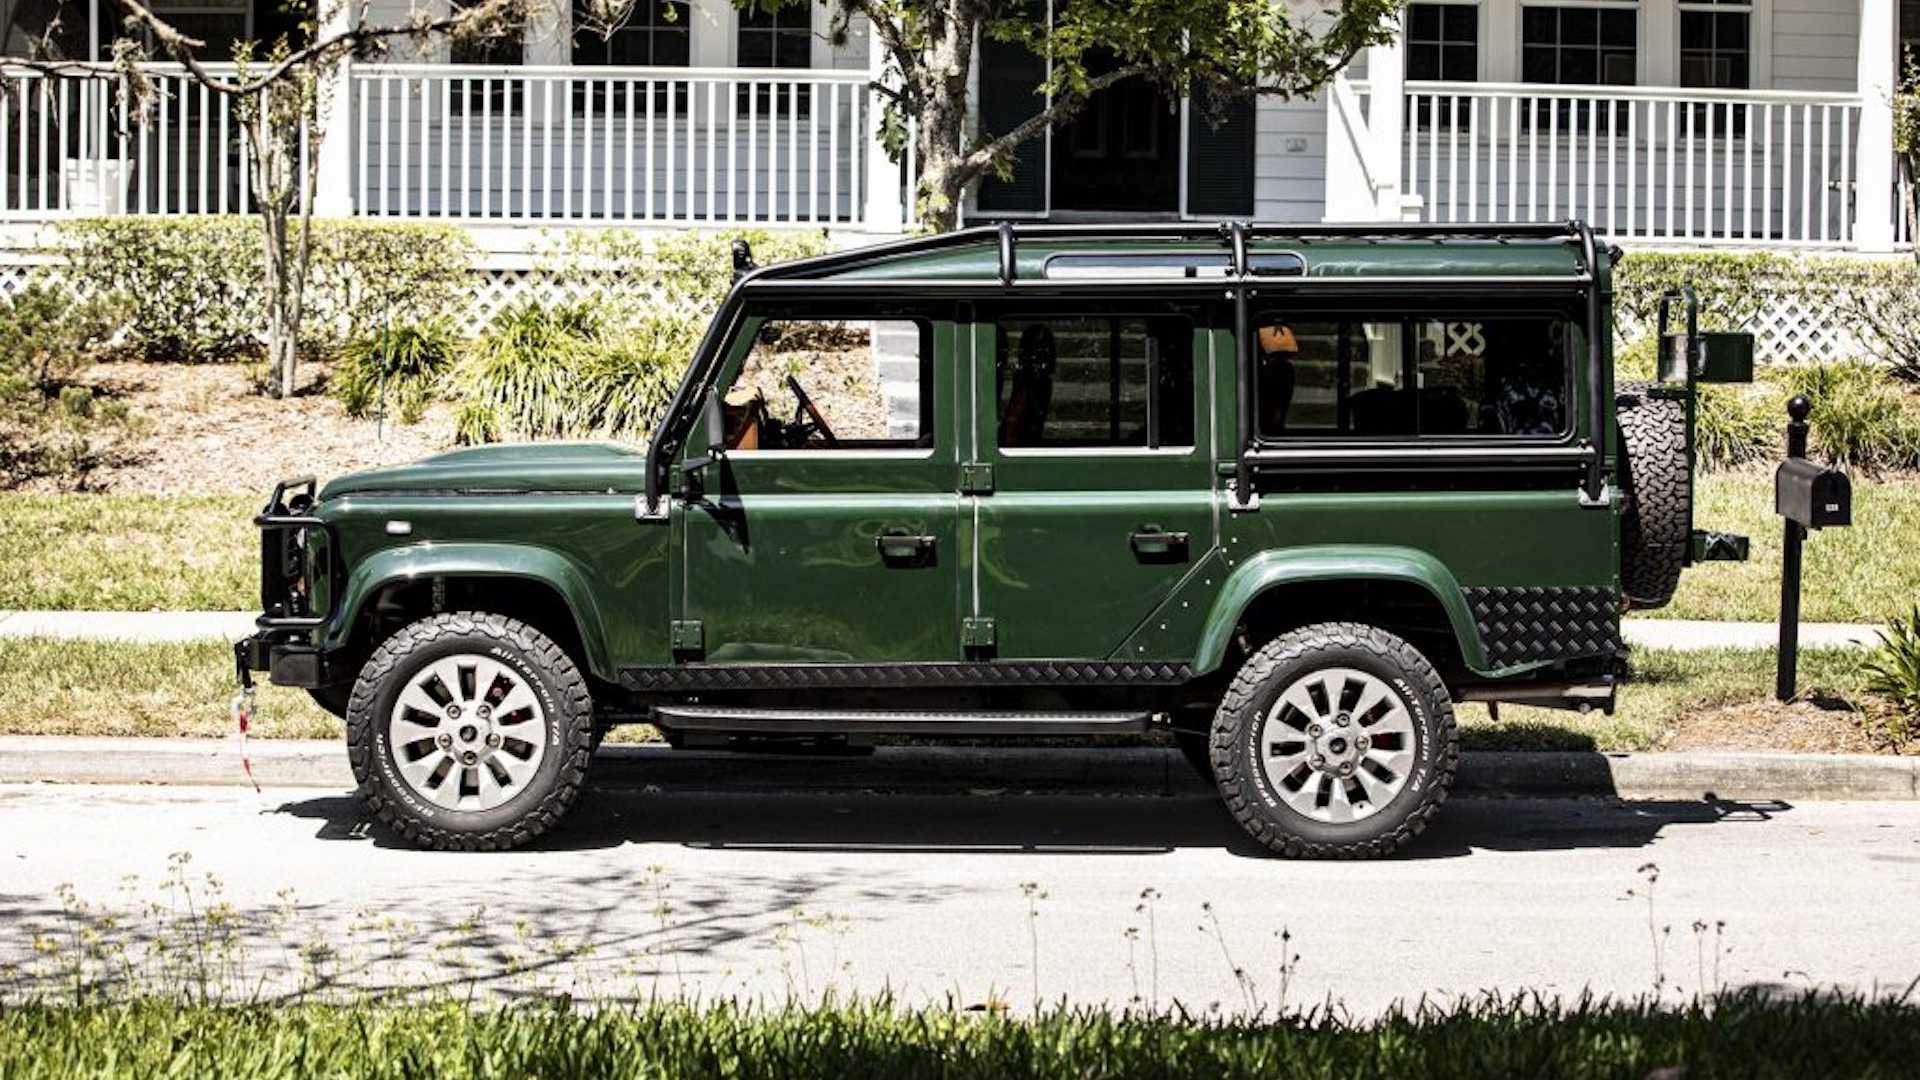 custom-land-rover-defender-with-ls3-engine-5